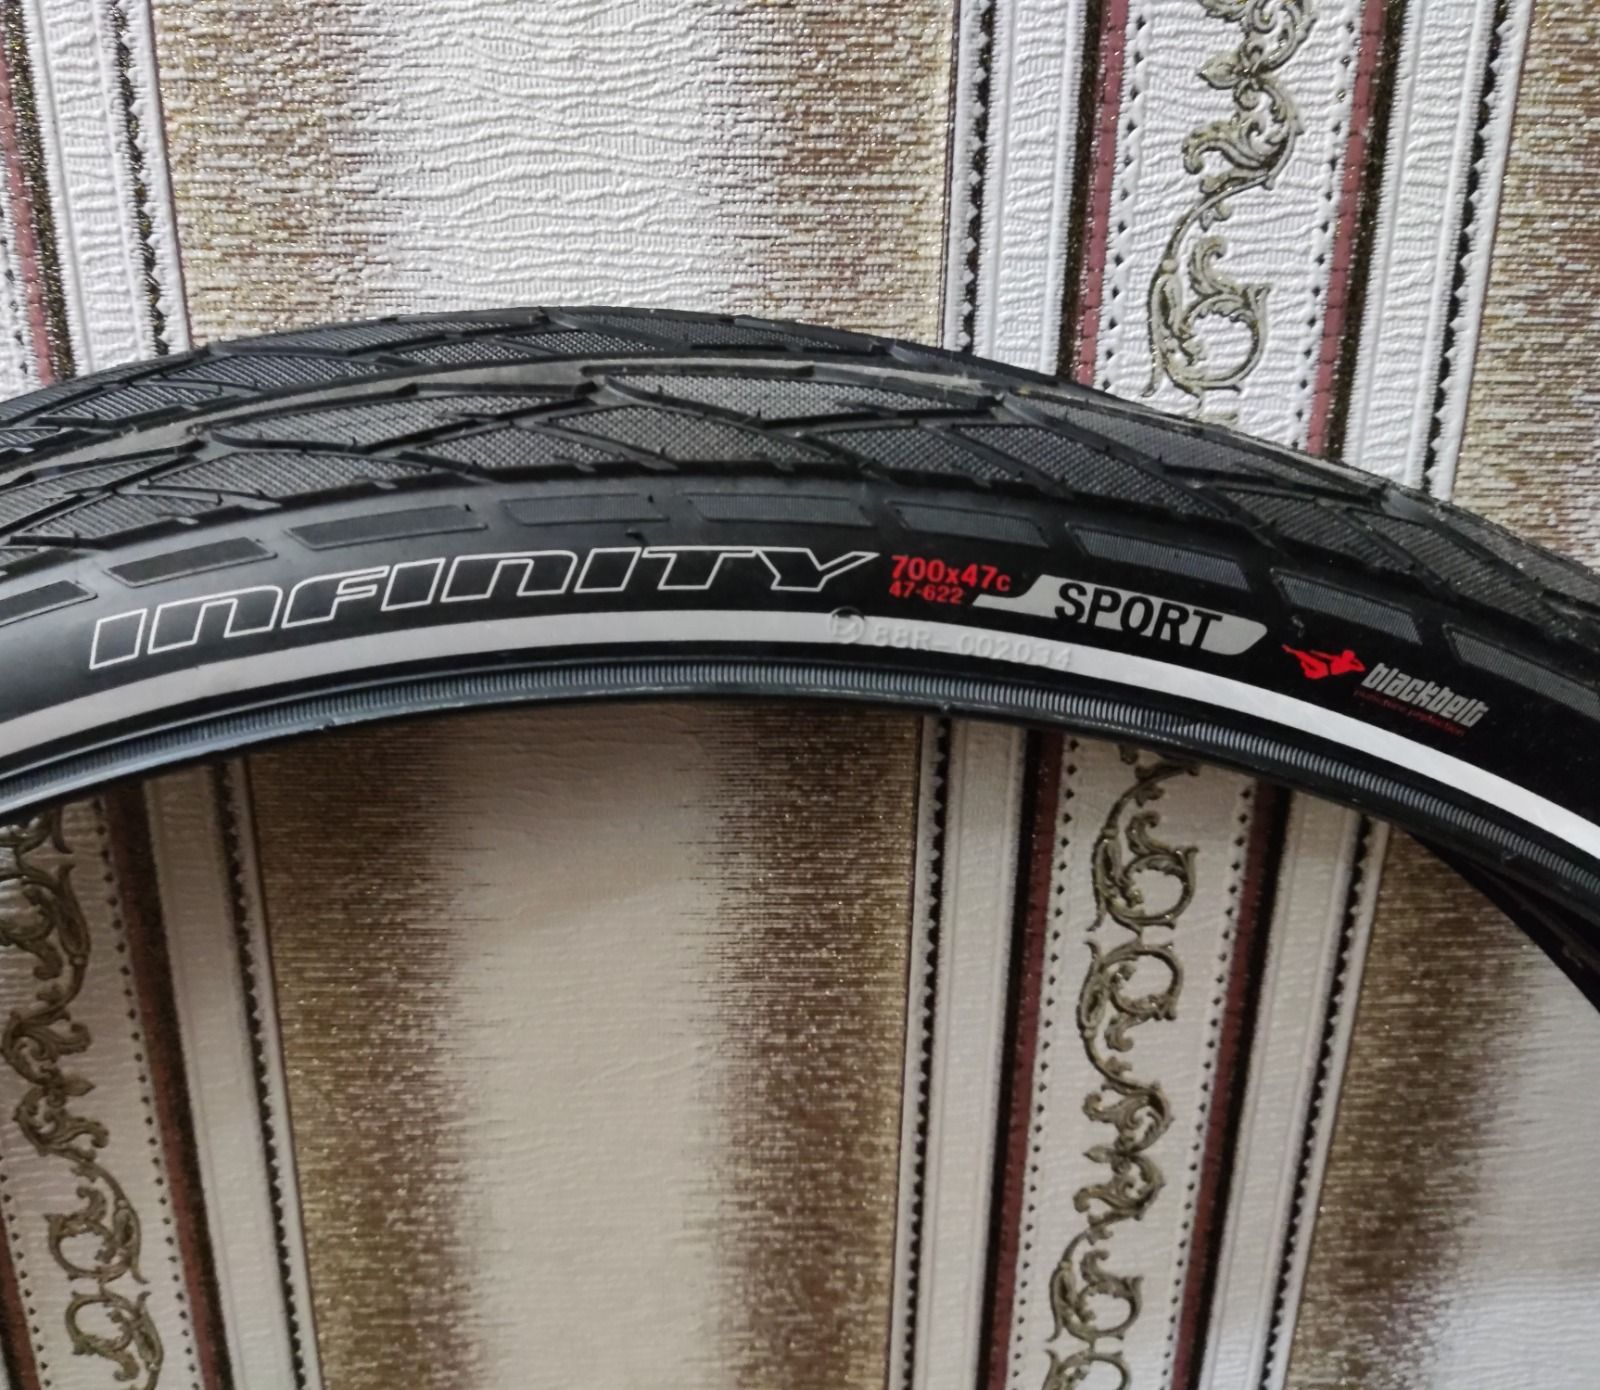 Покрышки specialized infinity sport reflection 700x47C